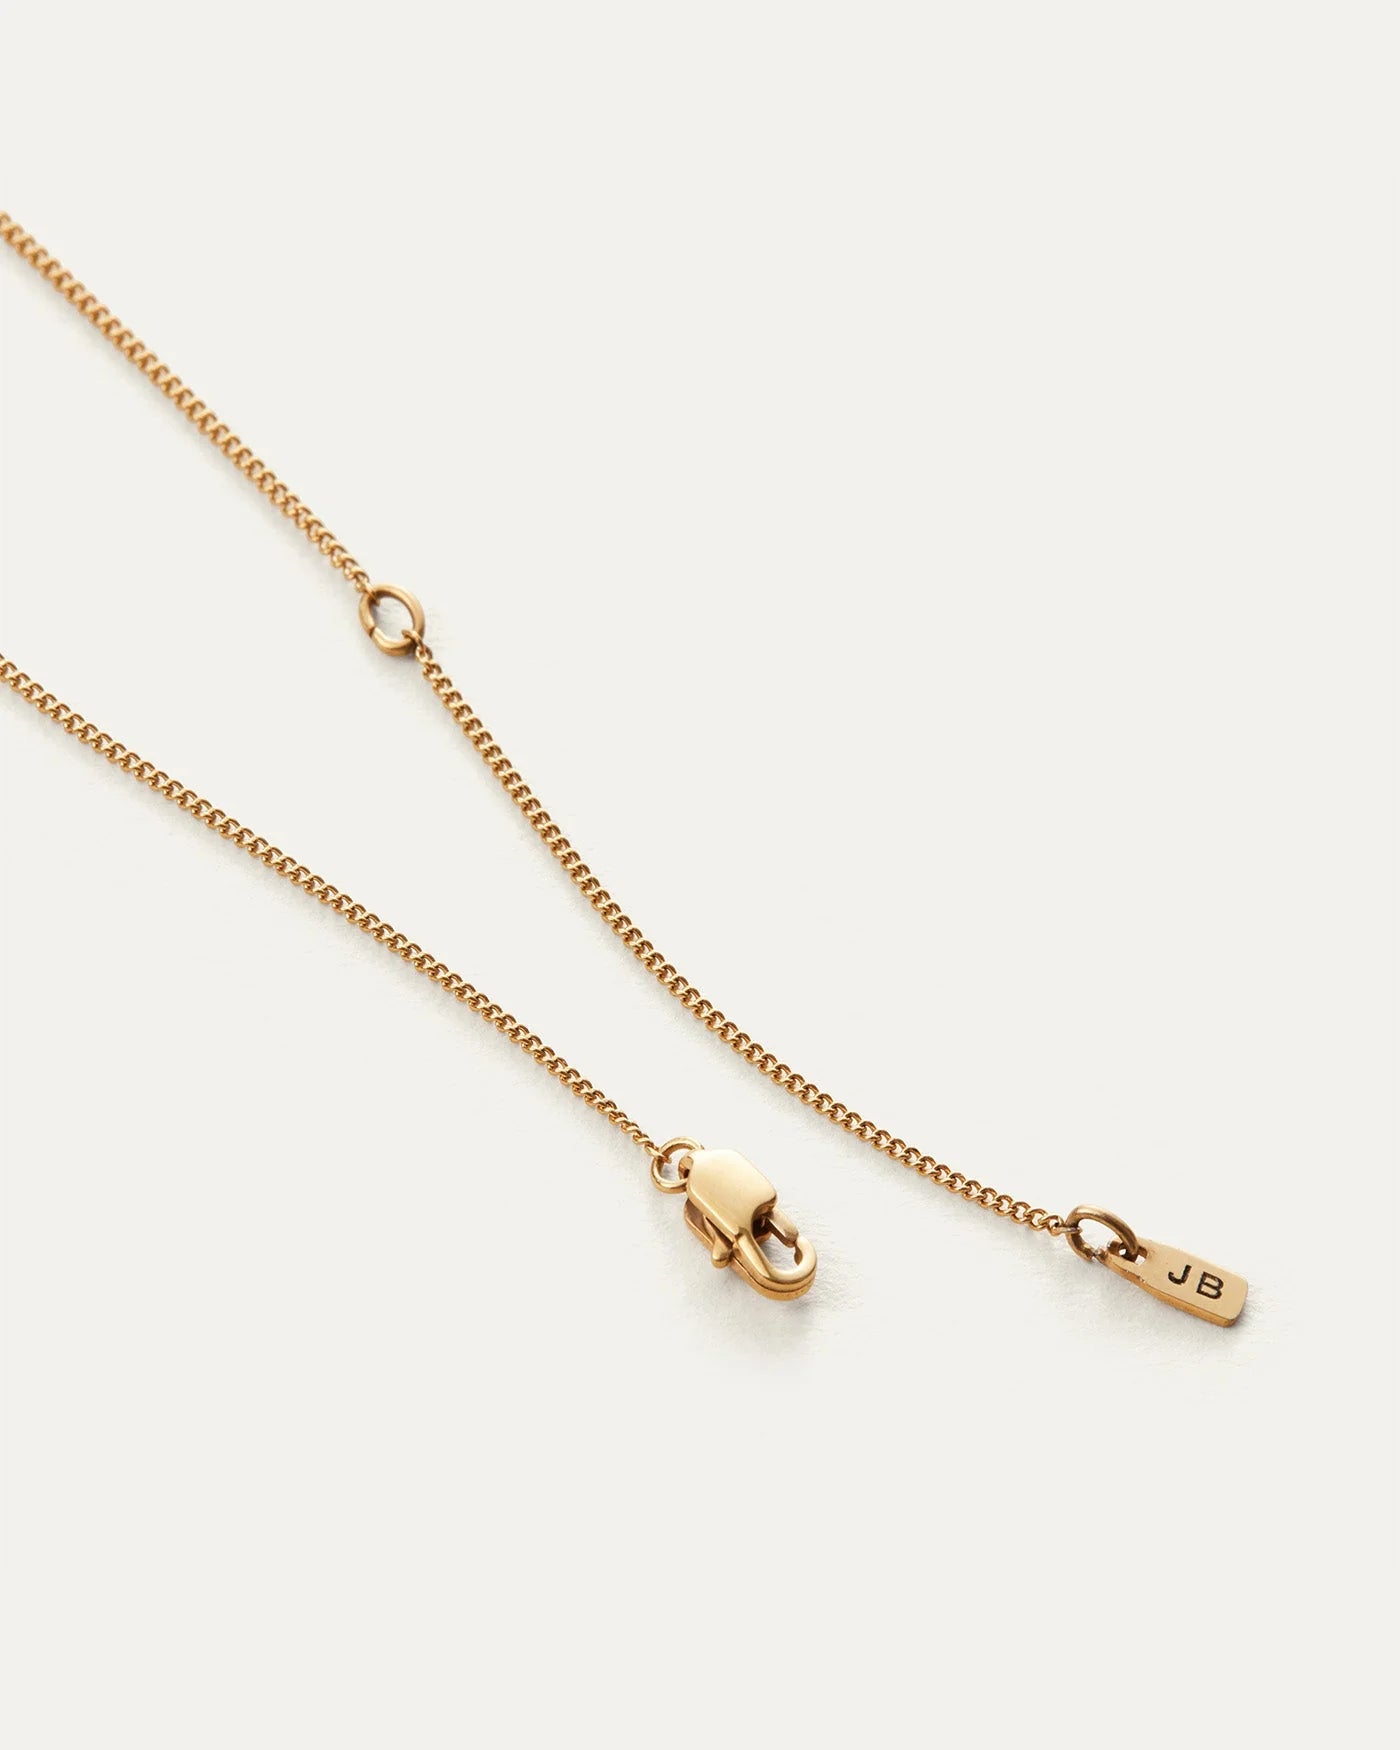 Monogram Necklace in Gold - G